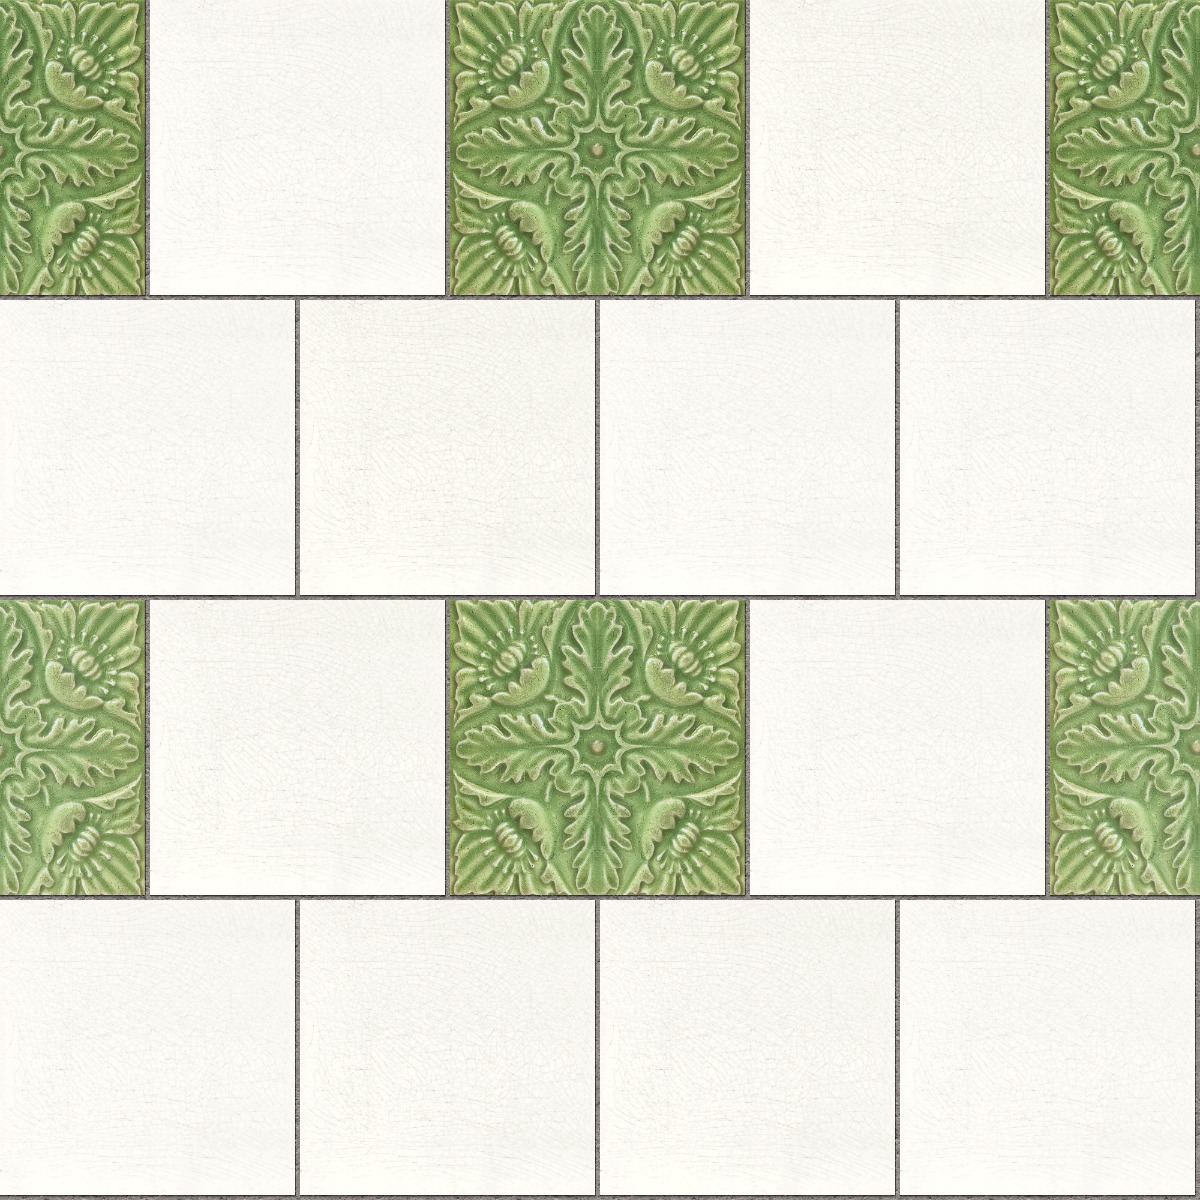 A seamless tile texture with crazing tile tiles arranged in a Stretcher pattern